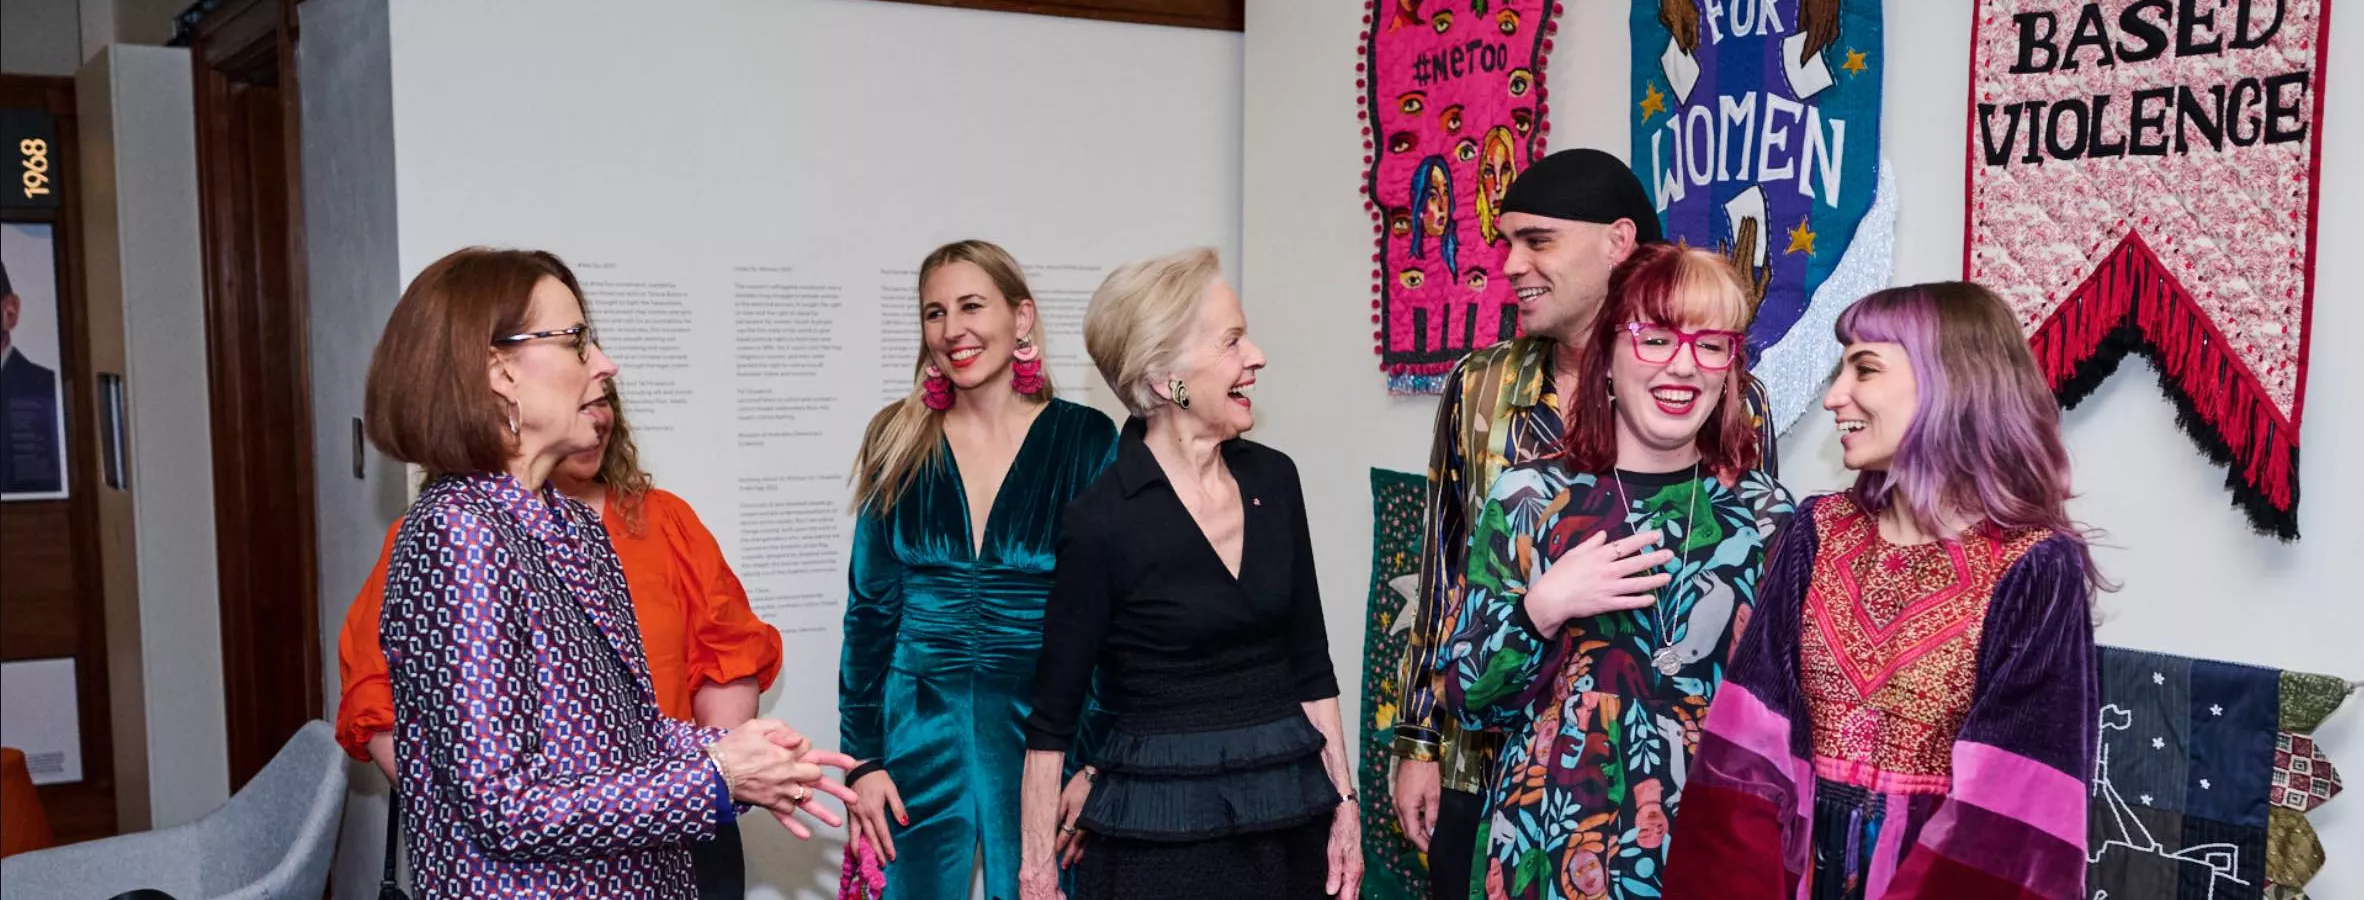 Quentin Bryce chats to artists in front of embroidered banners at the front of the Changemakers exhibition at MoAD.